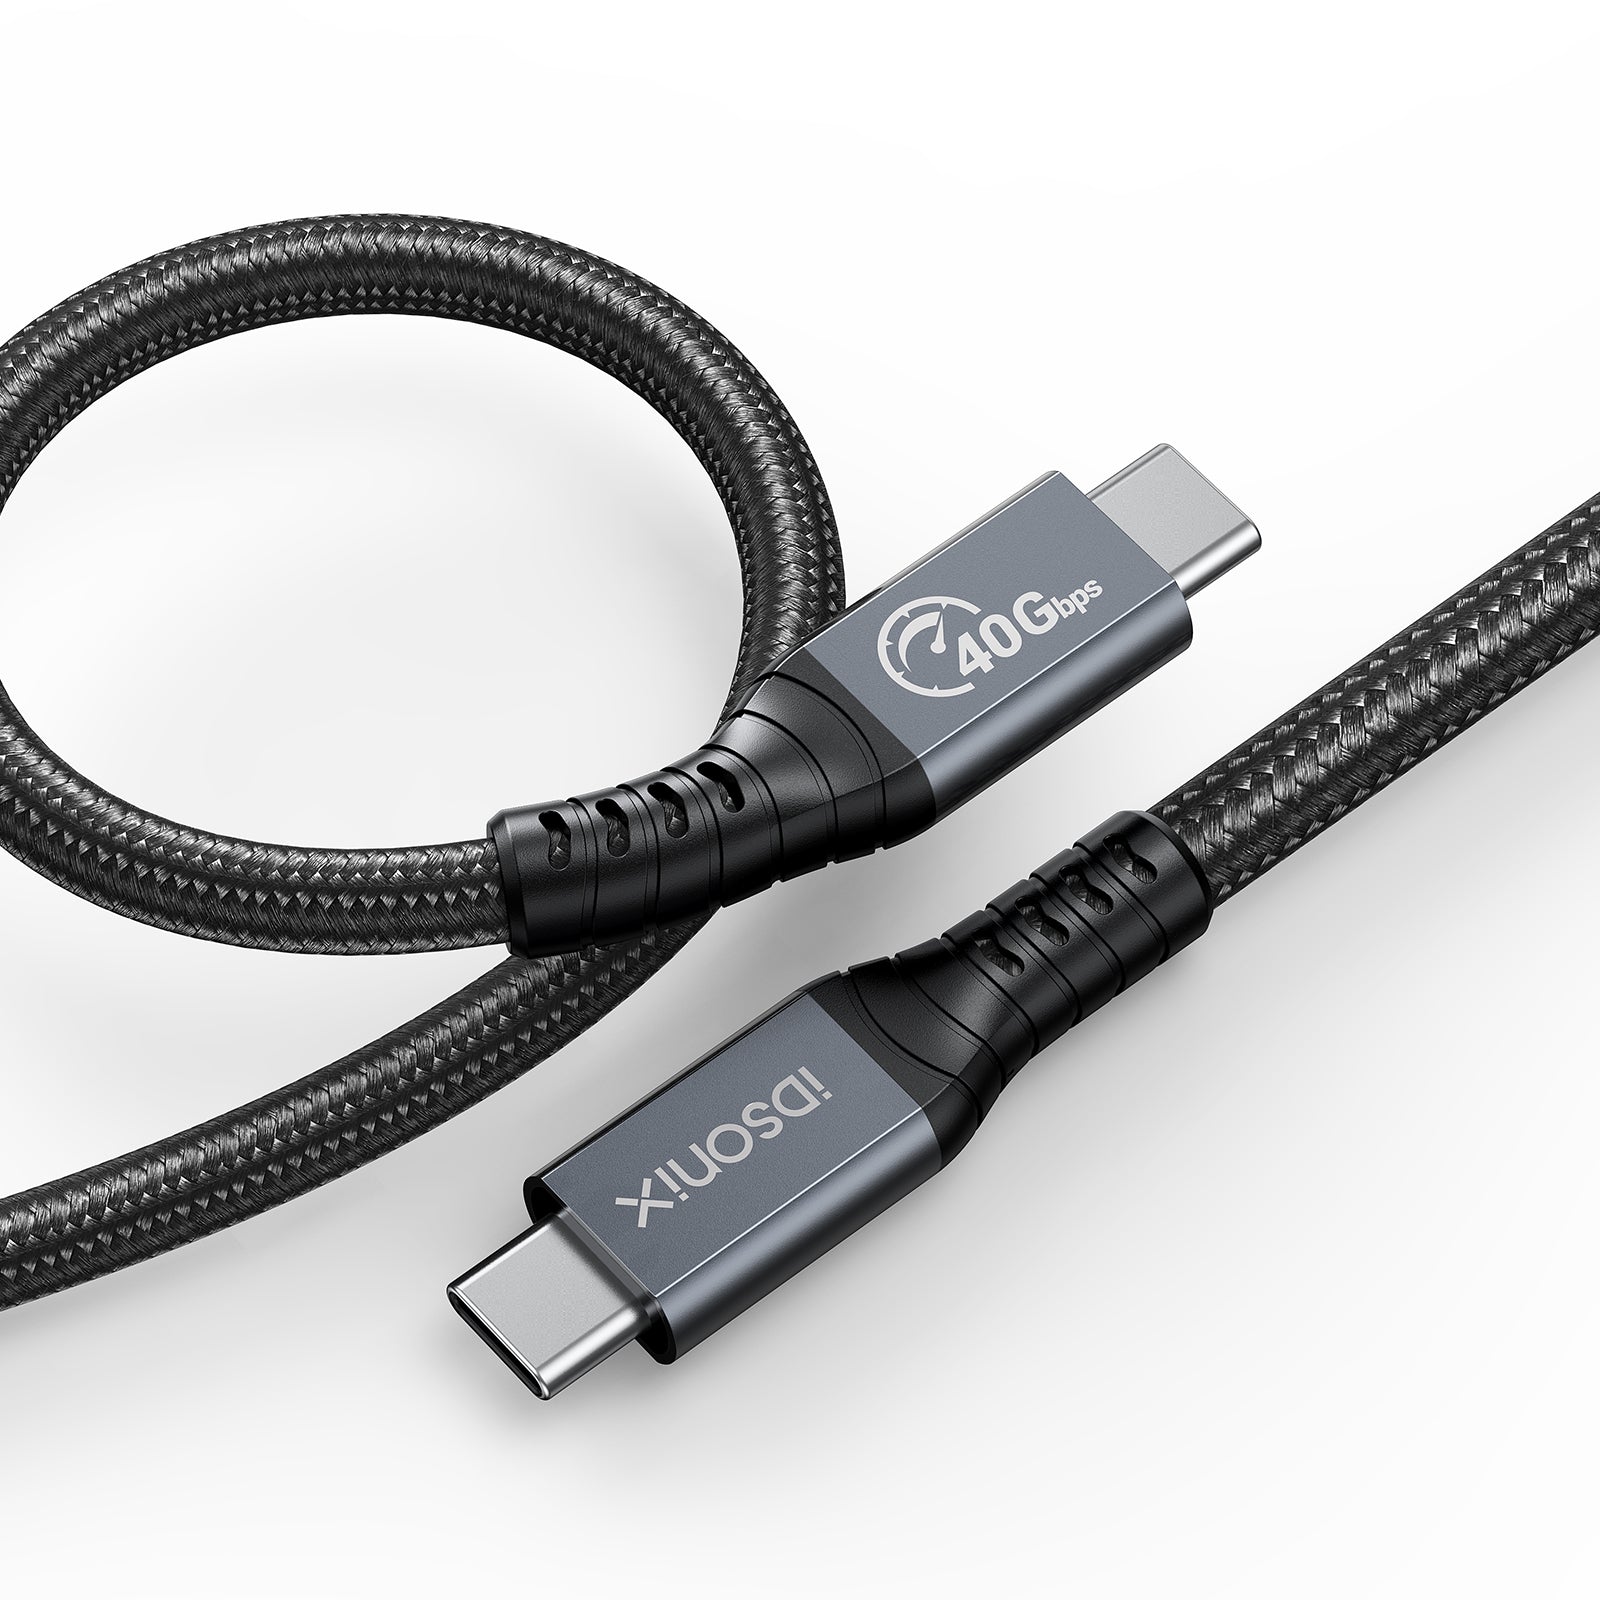 USB4 Cable 40Gbps, iDsonix Thunderbolt 4/Thunderbolt 3 Cable, USB 4.0